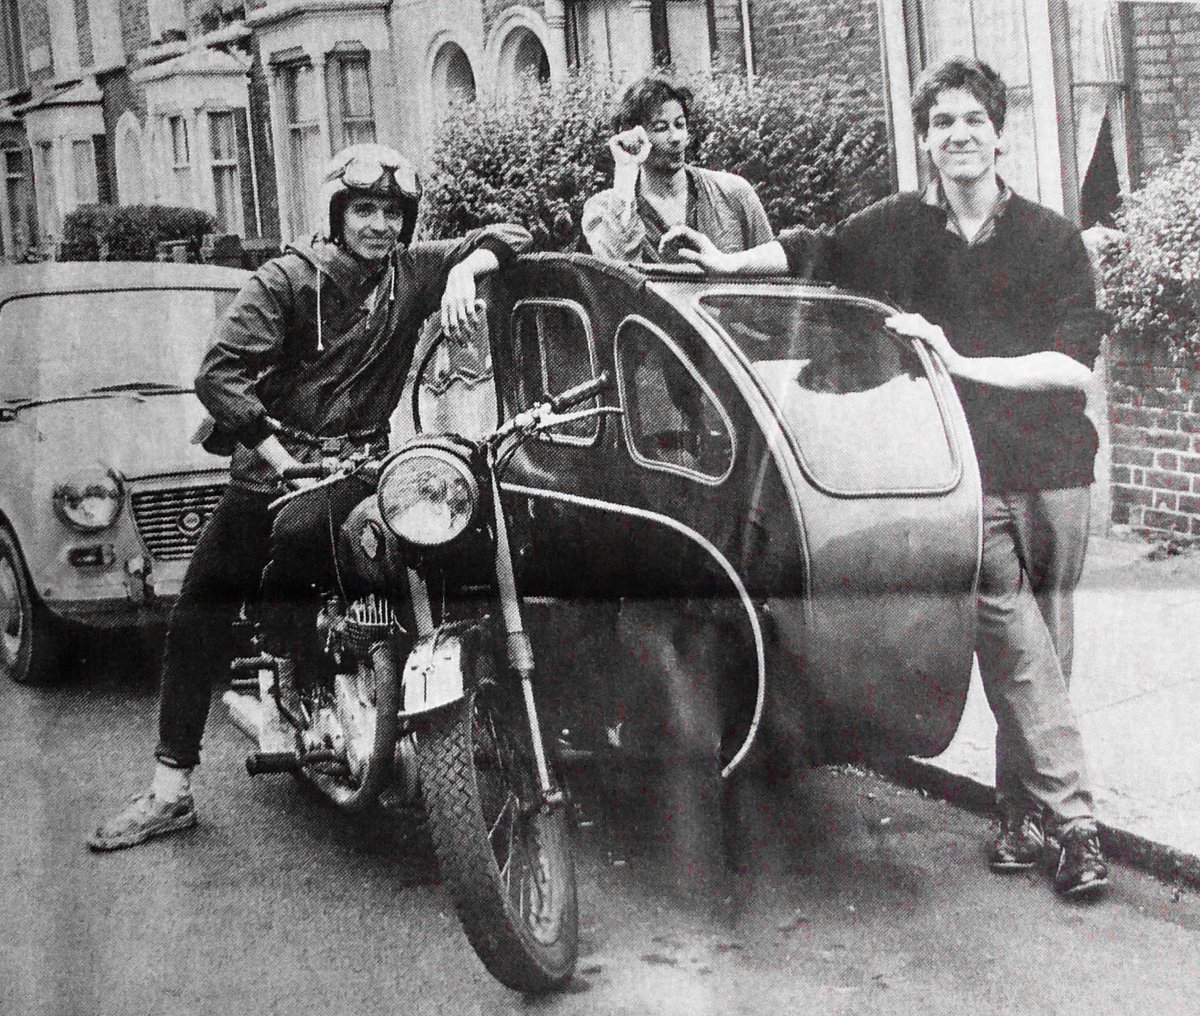 One of my favourite photos of #SwellMaps. 
I can only presume #NikkiSudden is in the sidecar….😉
#BigglesBooks
#JoweHead
#EpicSoundtracks